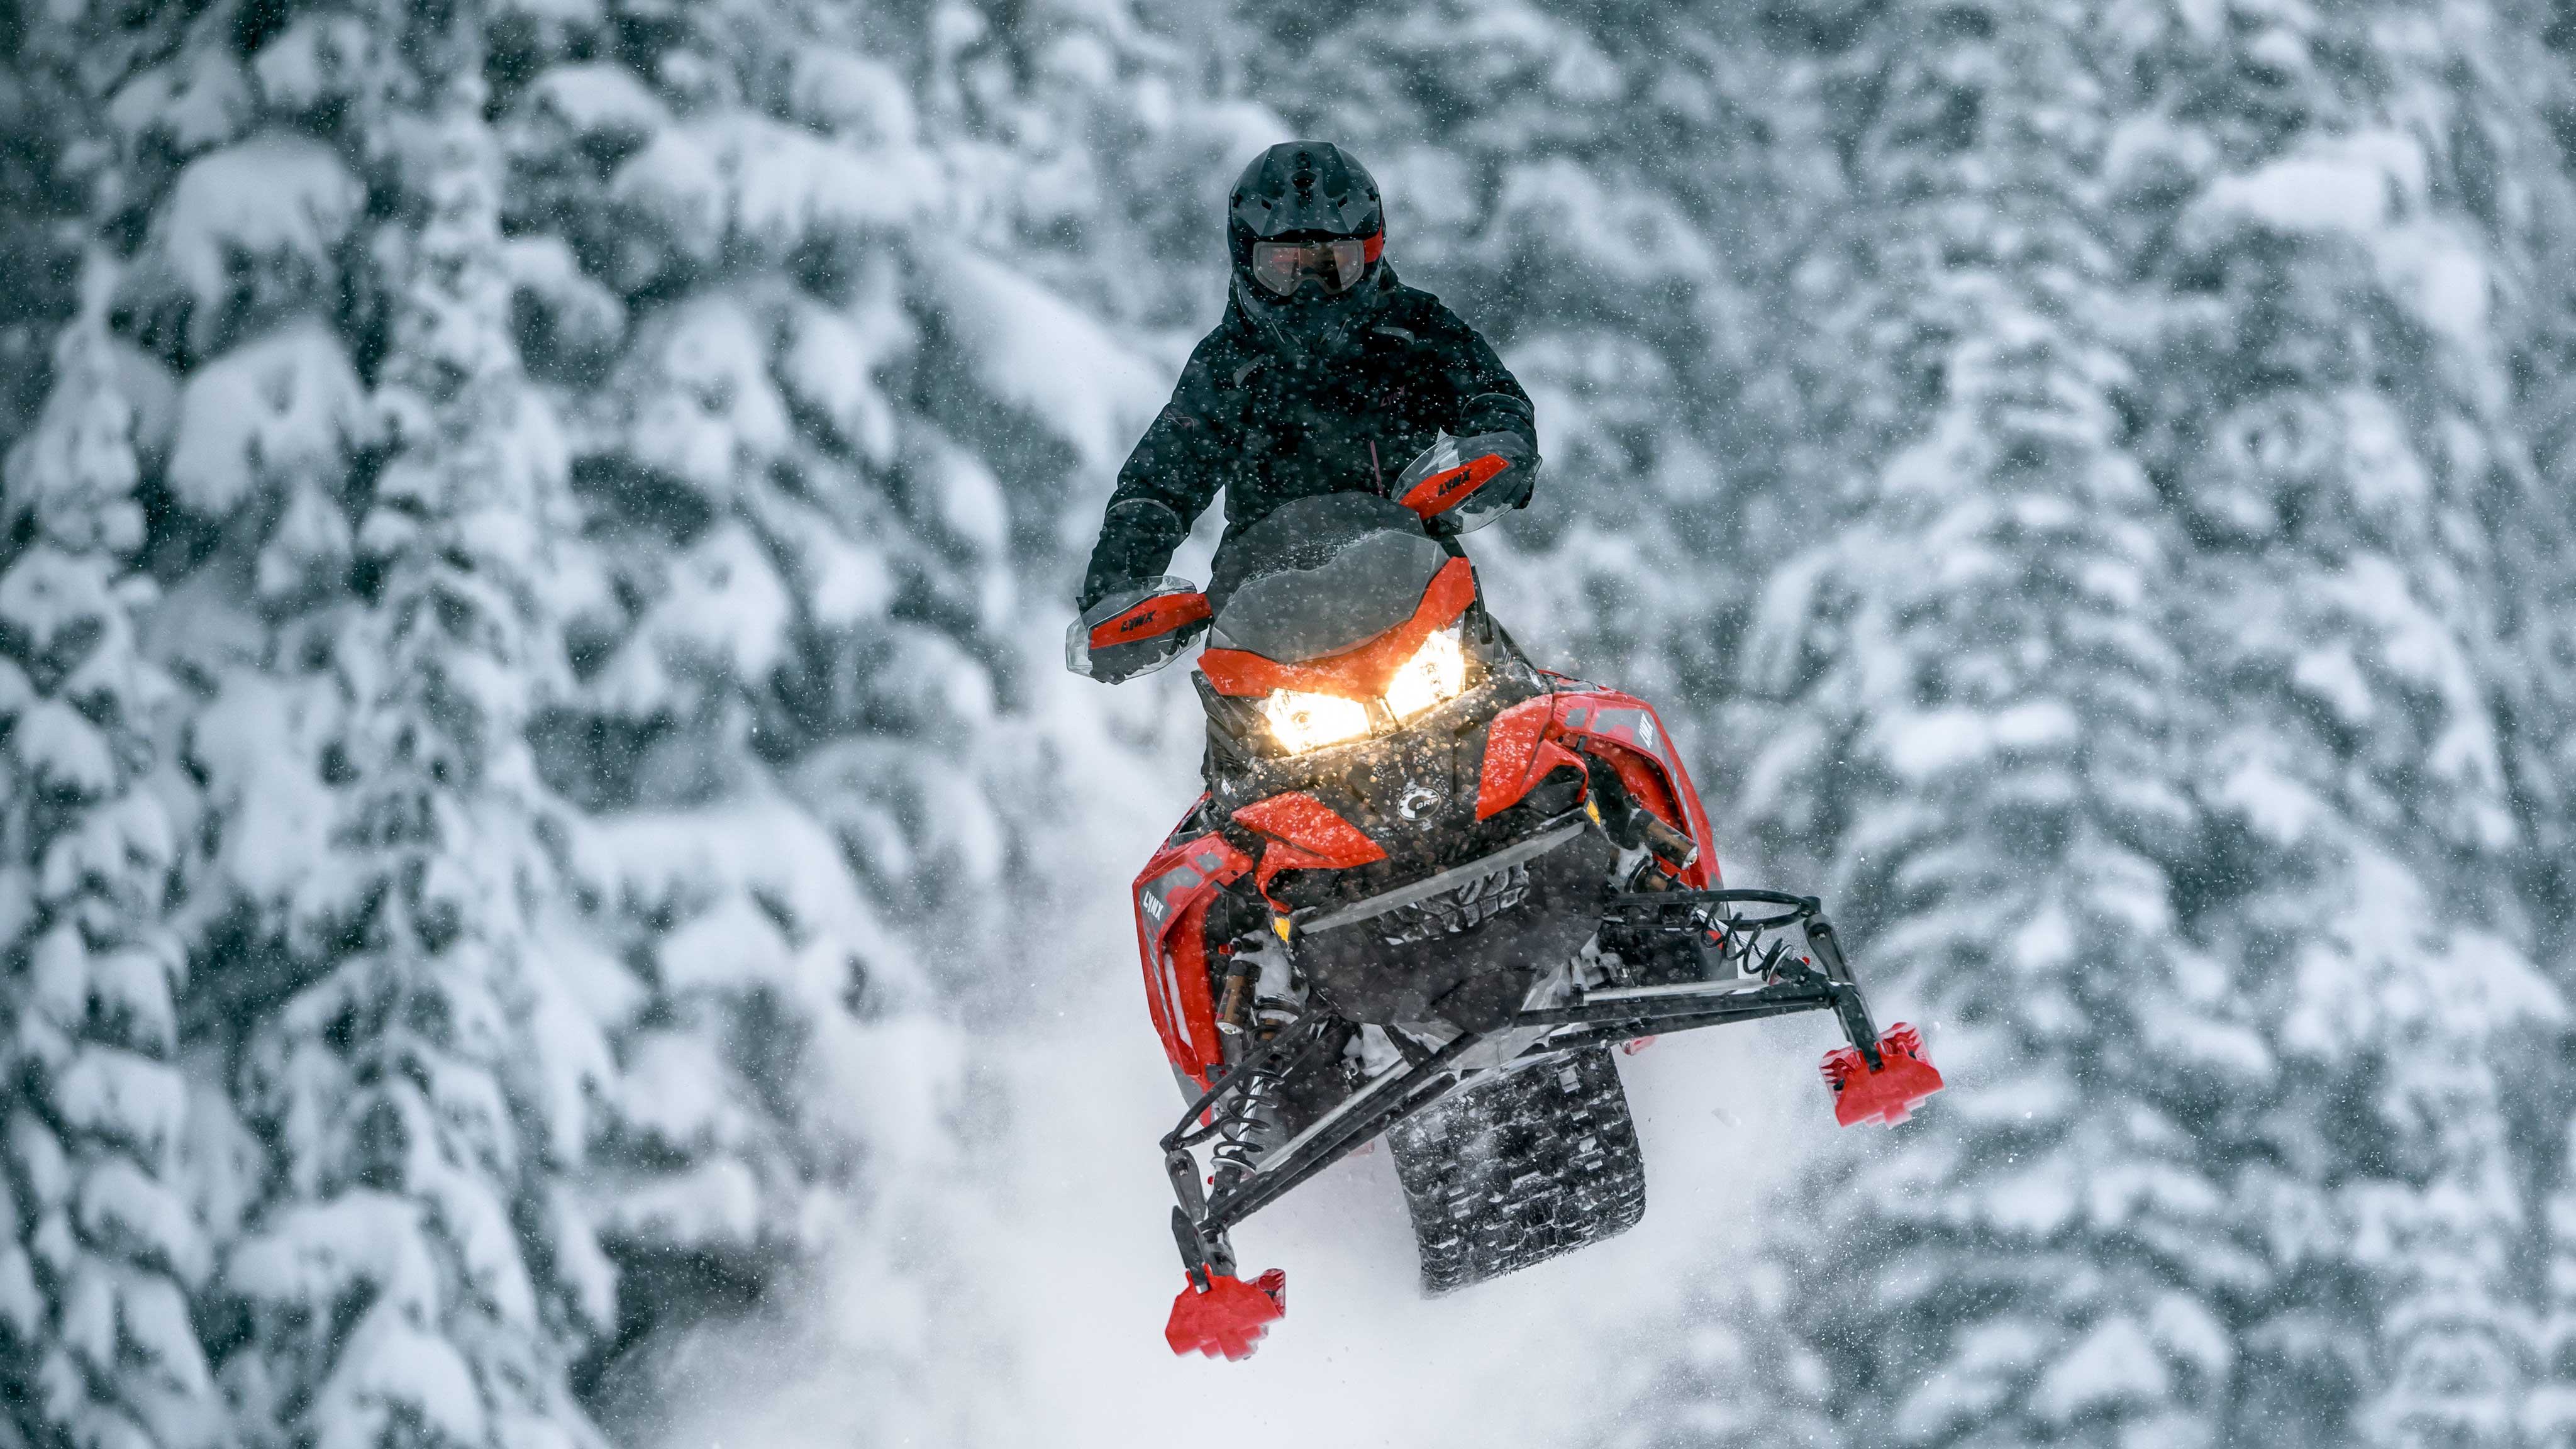 Lynx Rave RE snøscooter i humpete løype